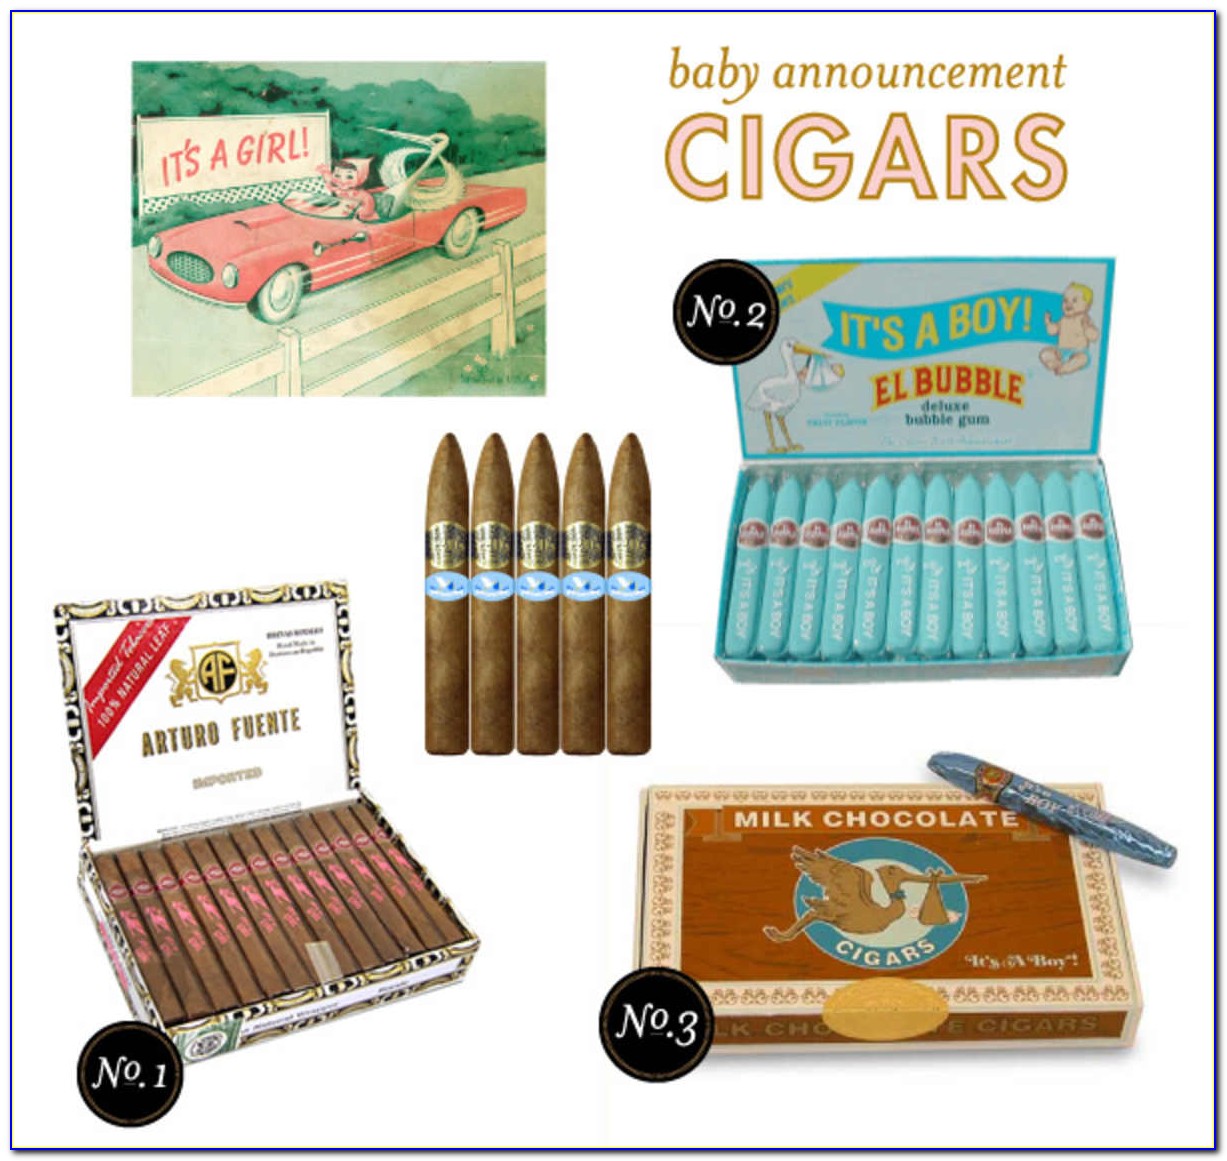 Personalized Baby Announcement Cigars